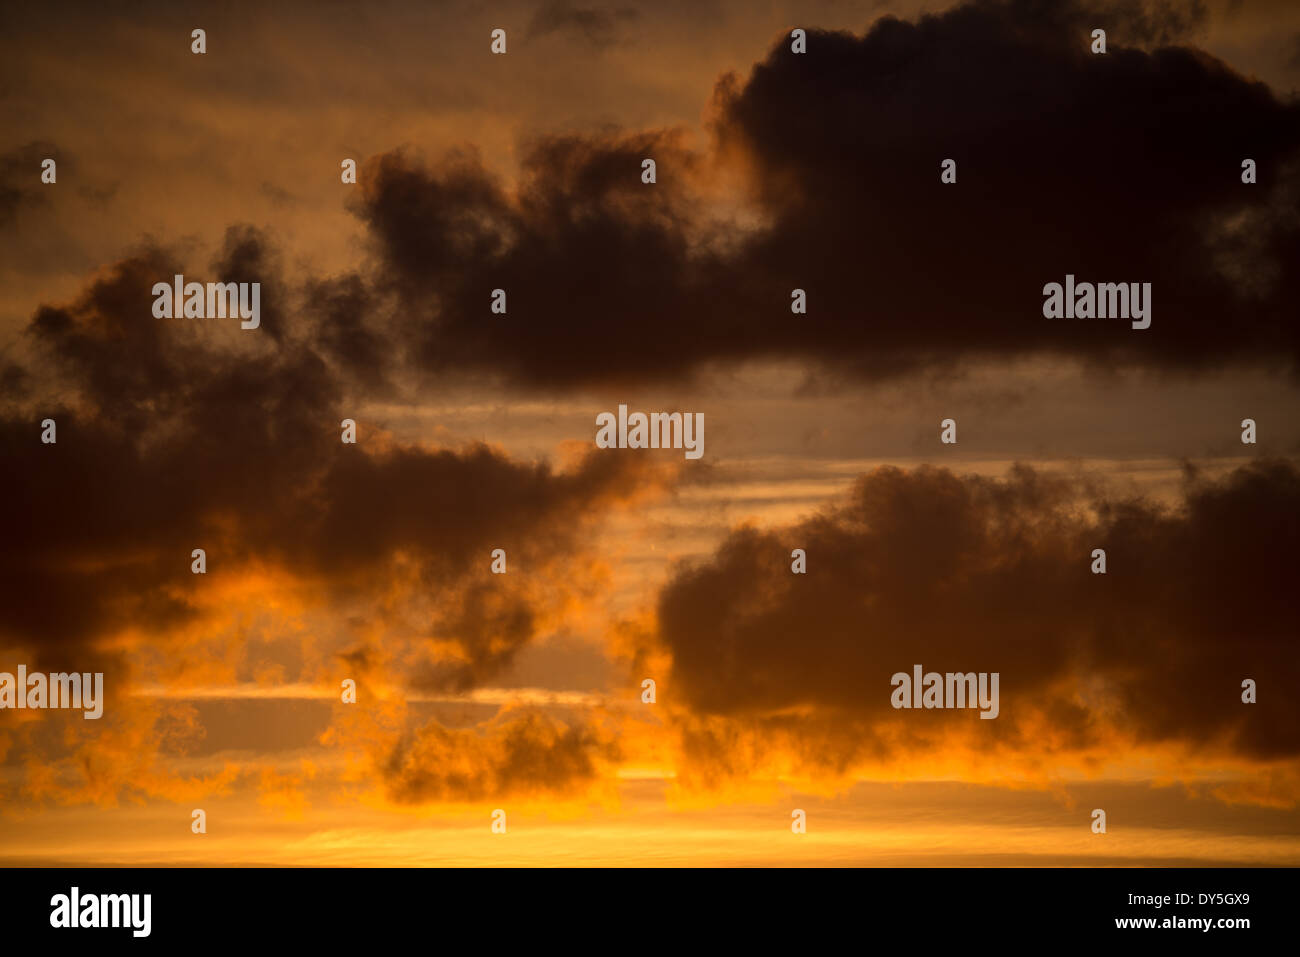 Light clouds are silhouette against a golden sky at sunset. Stock Photo